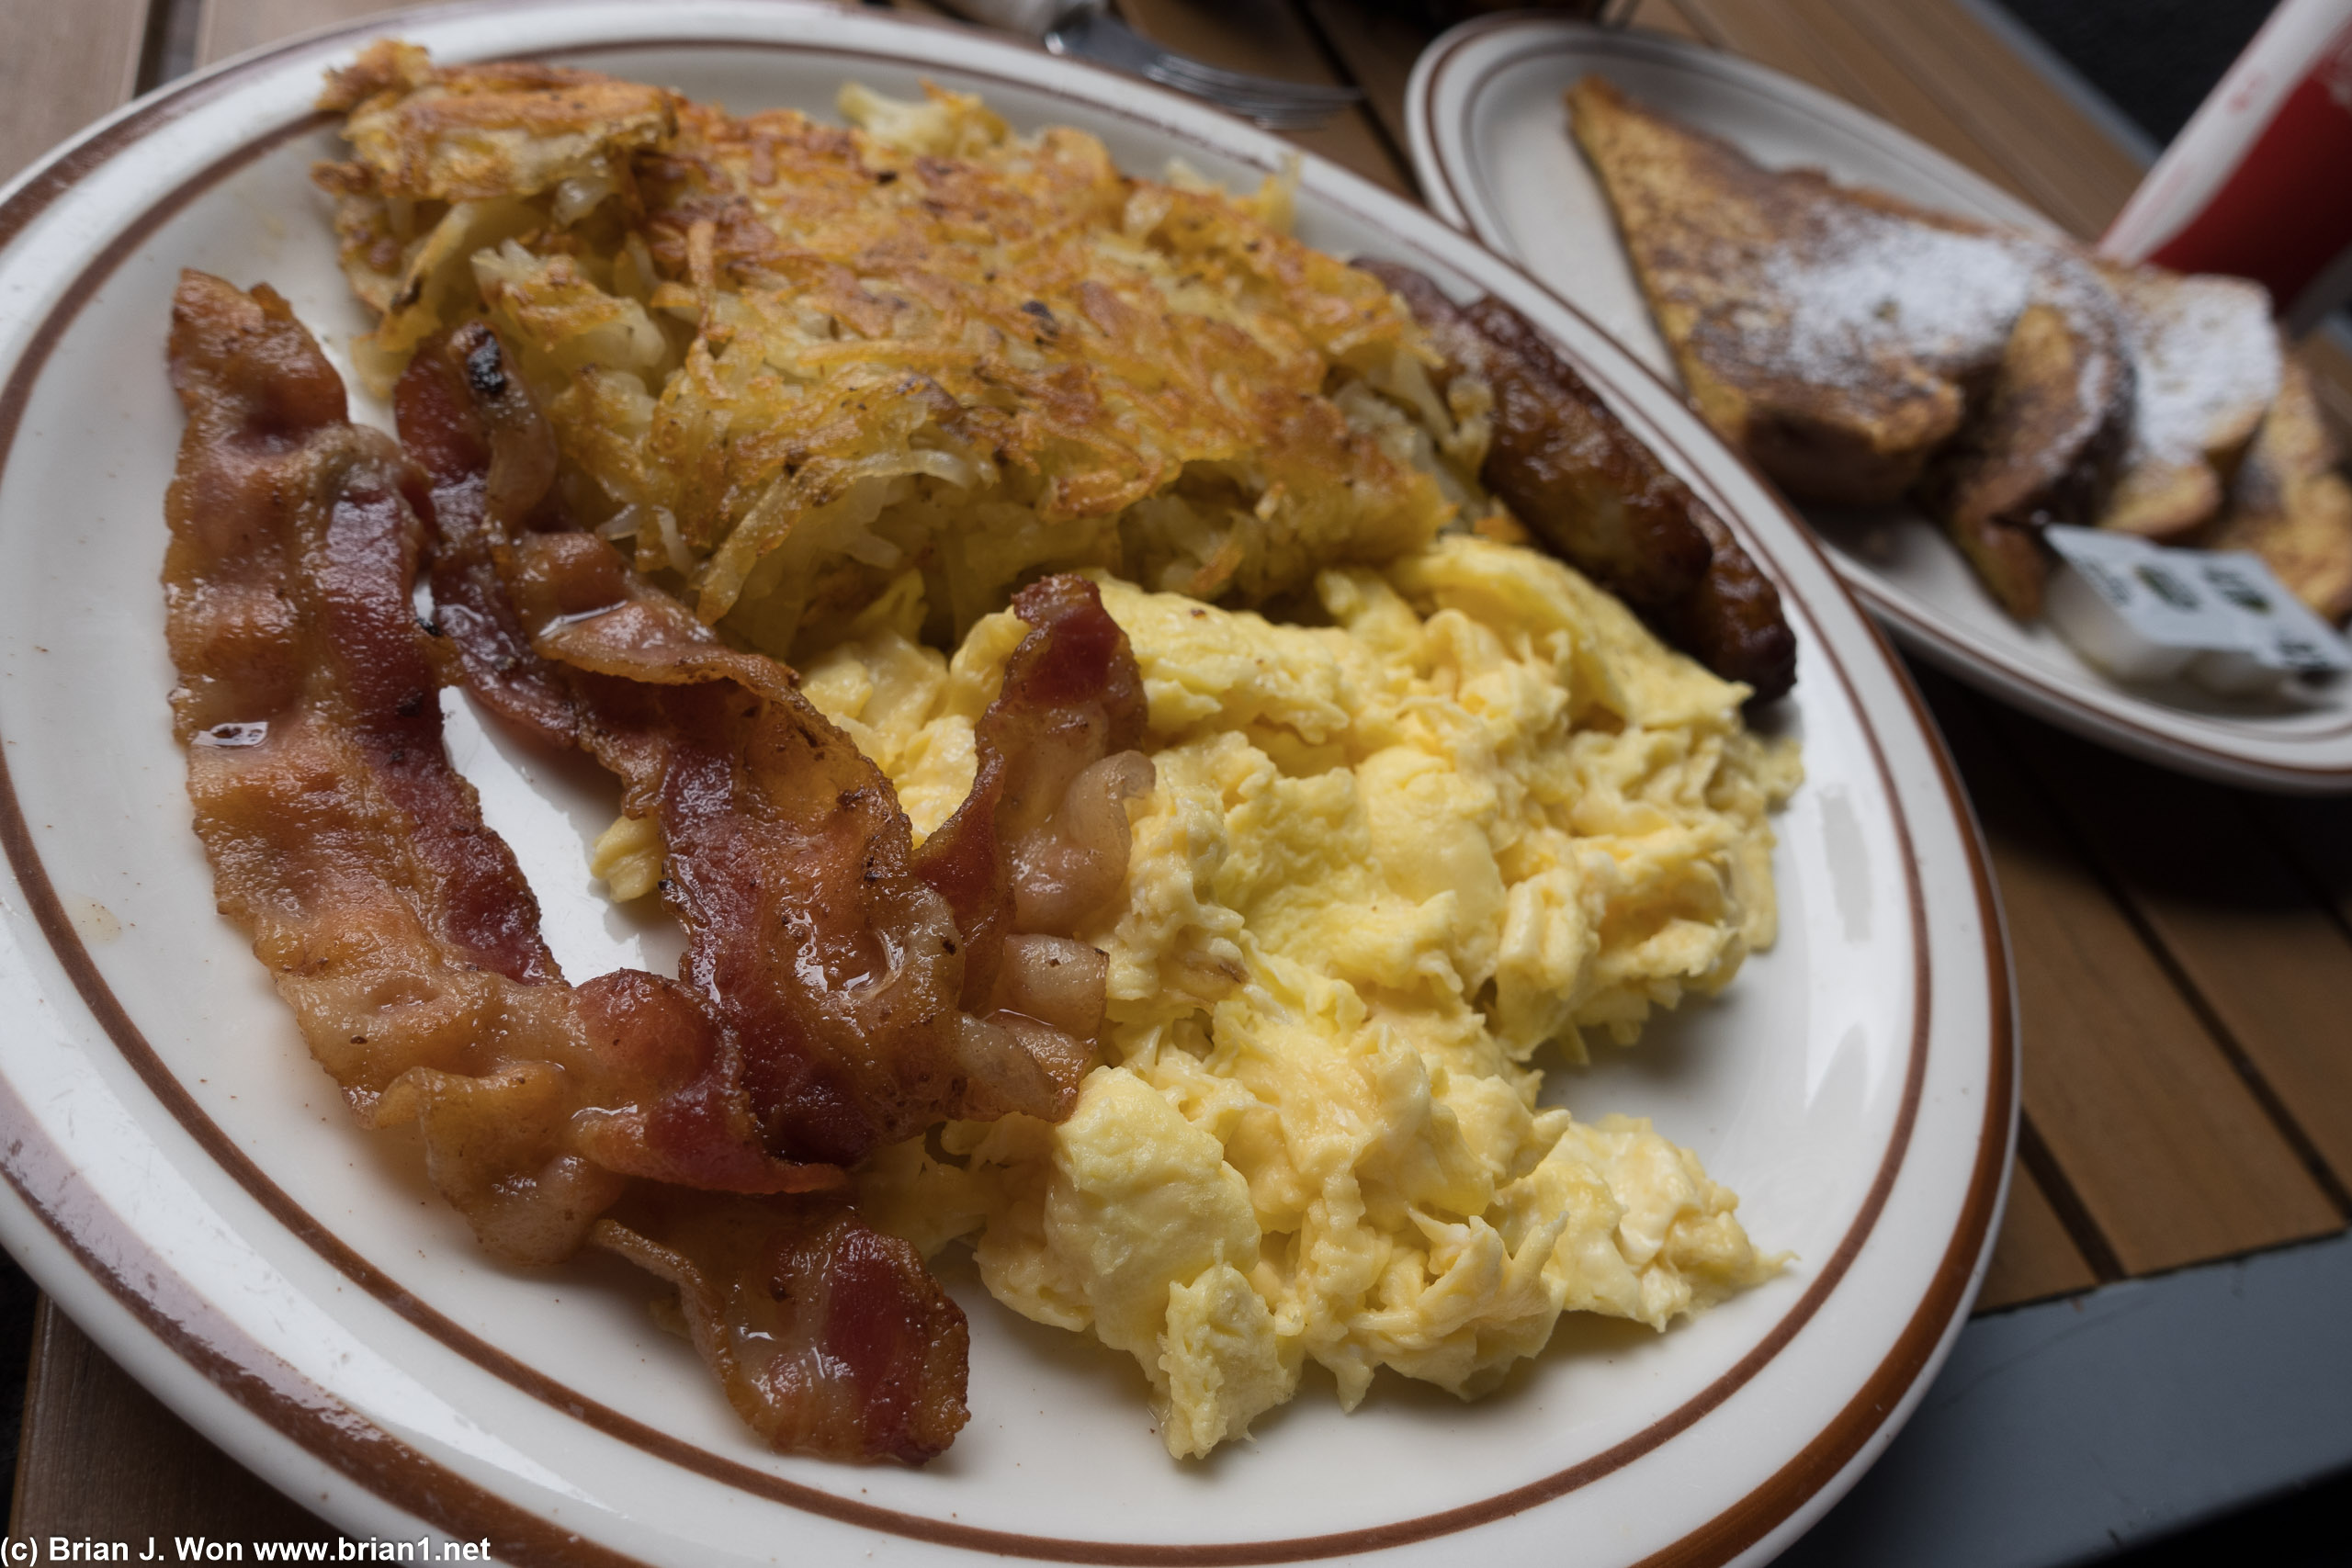 Hash browns are tasty, and that's a generous portion of eggs and bacon.